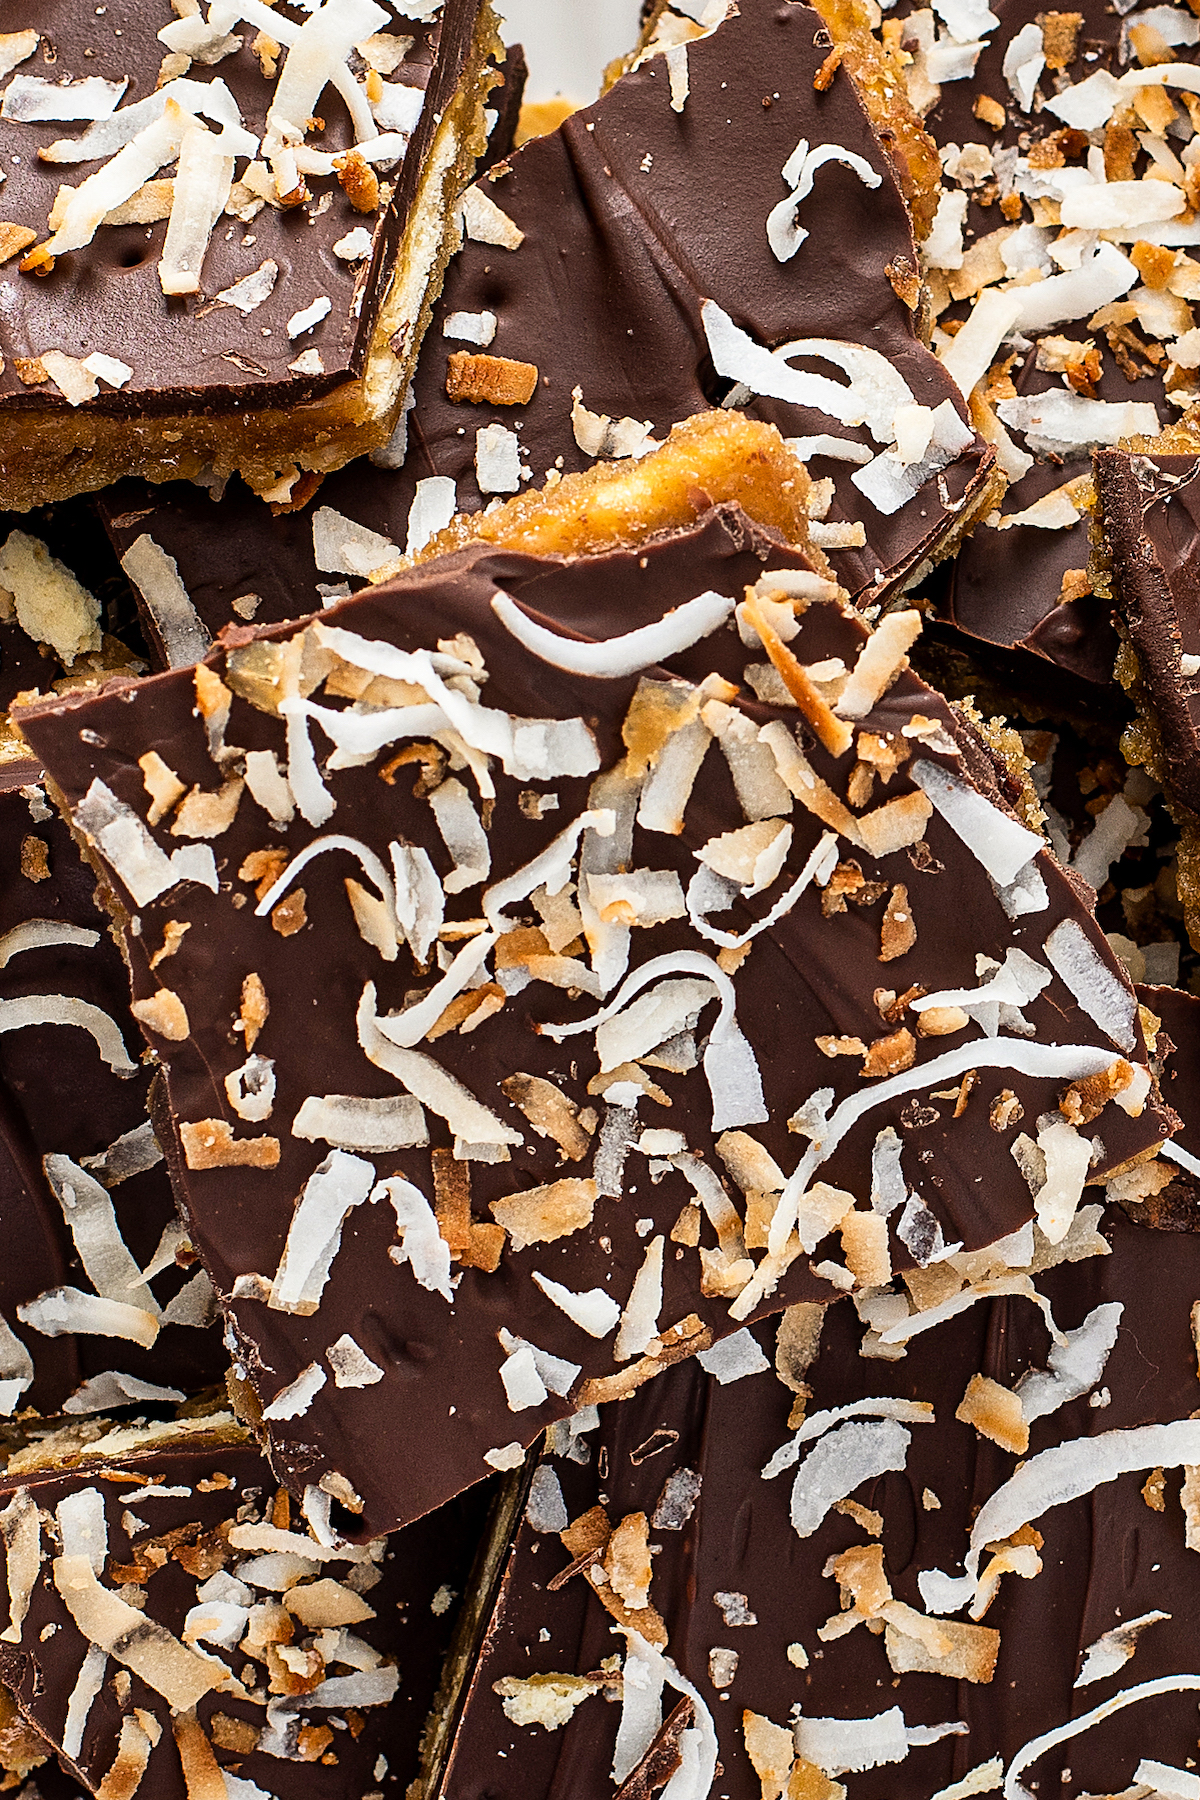 Coconut flakes on top of chocolate saltine cracker toffee.